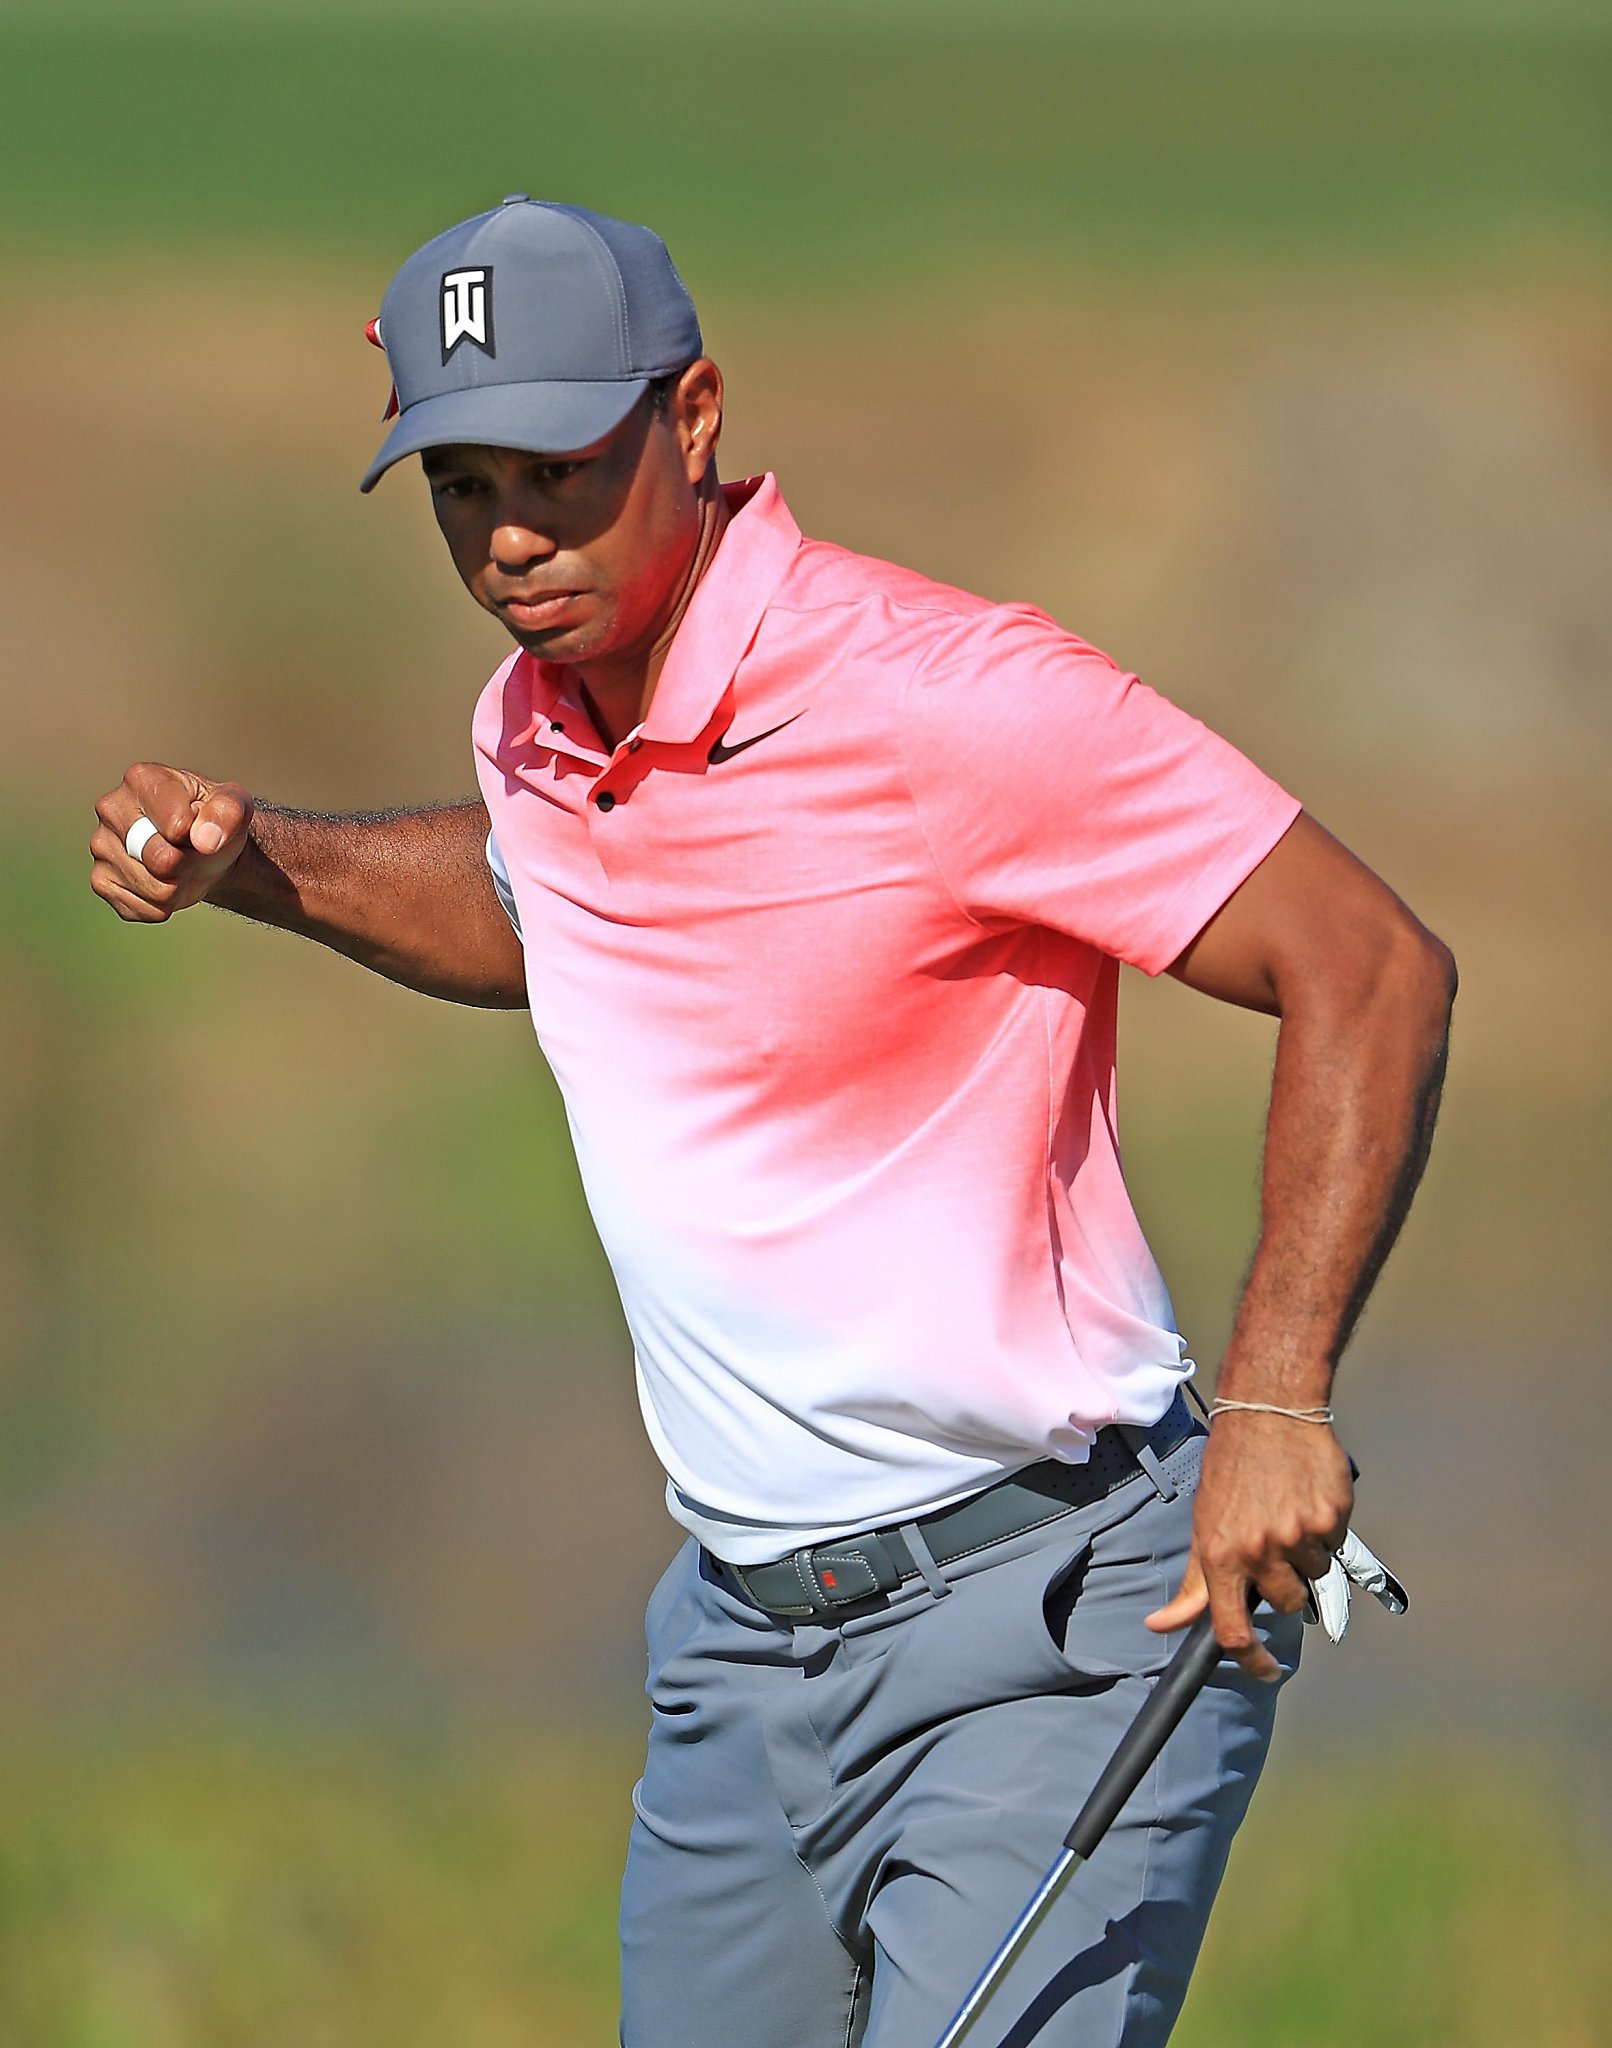 Tiger Woods 4 back with everyone around him at Honda Classic